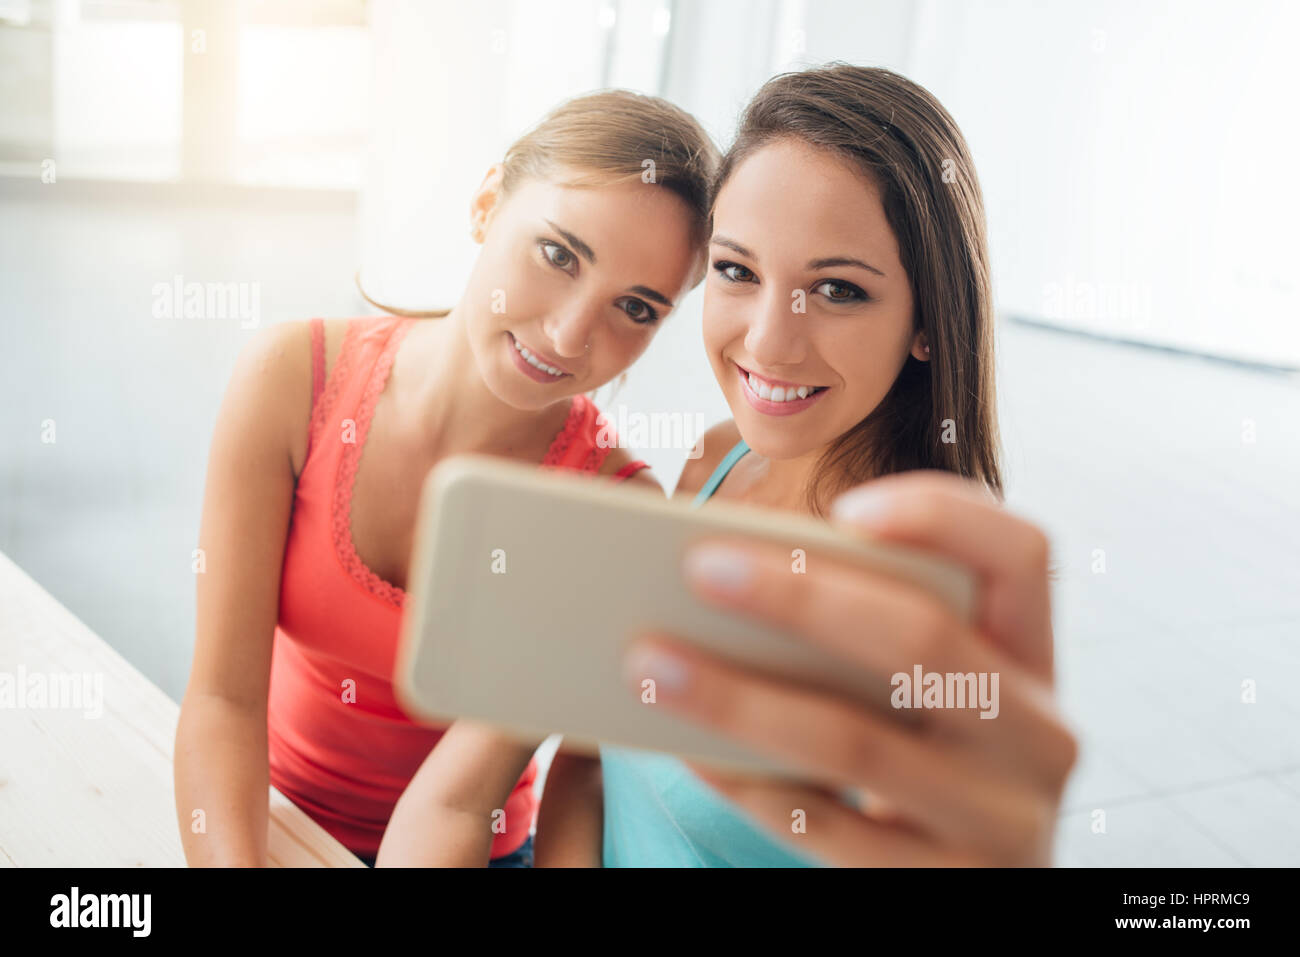 Cute girls sitting at desk and taking self portraits using a smart phone, they are smiling at camera and posing Stock Photo